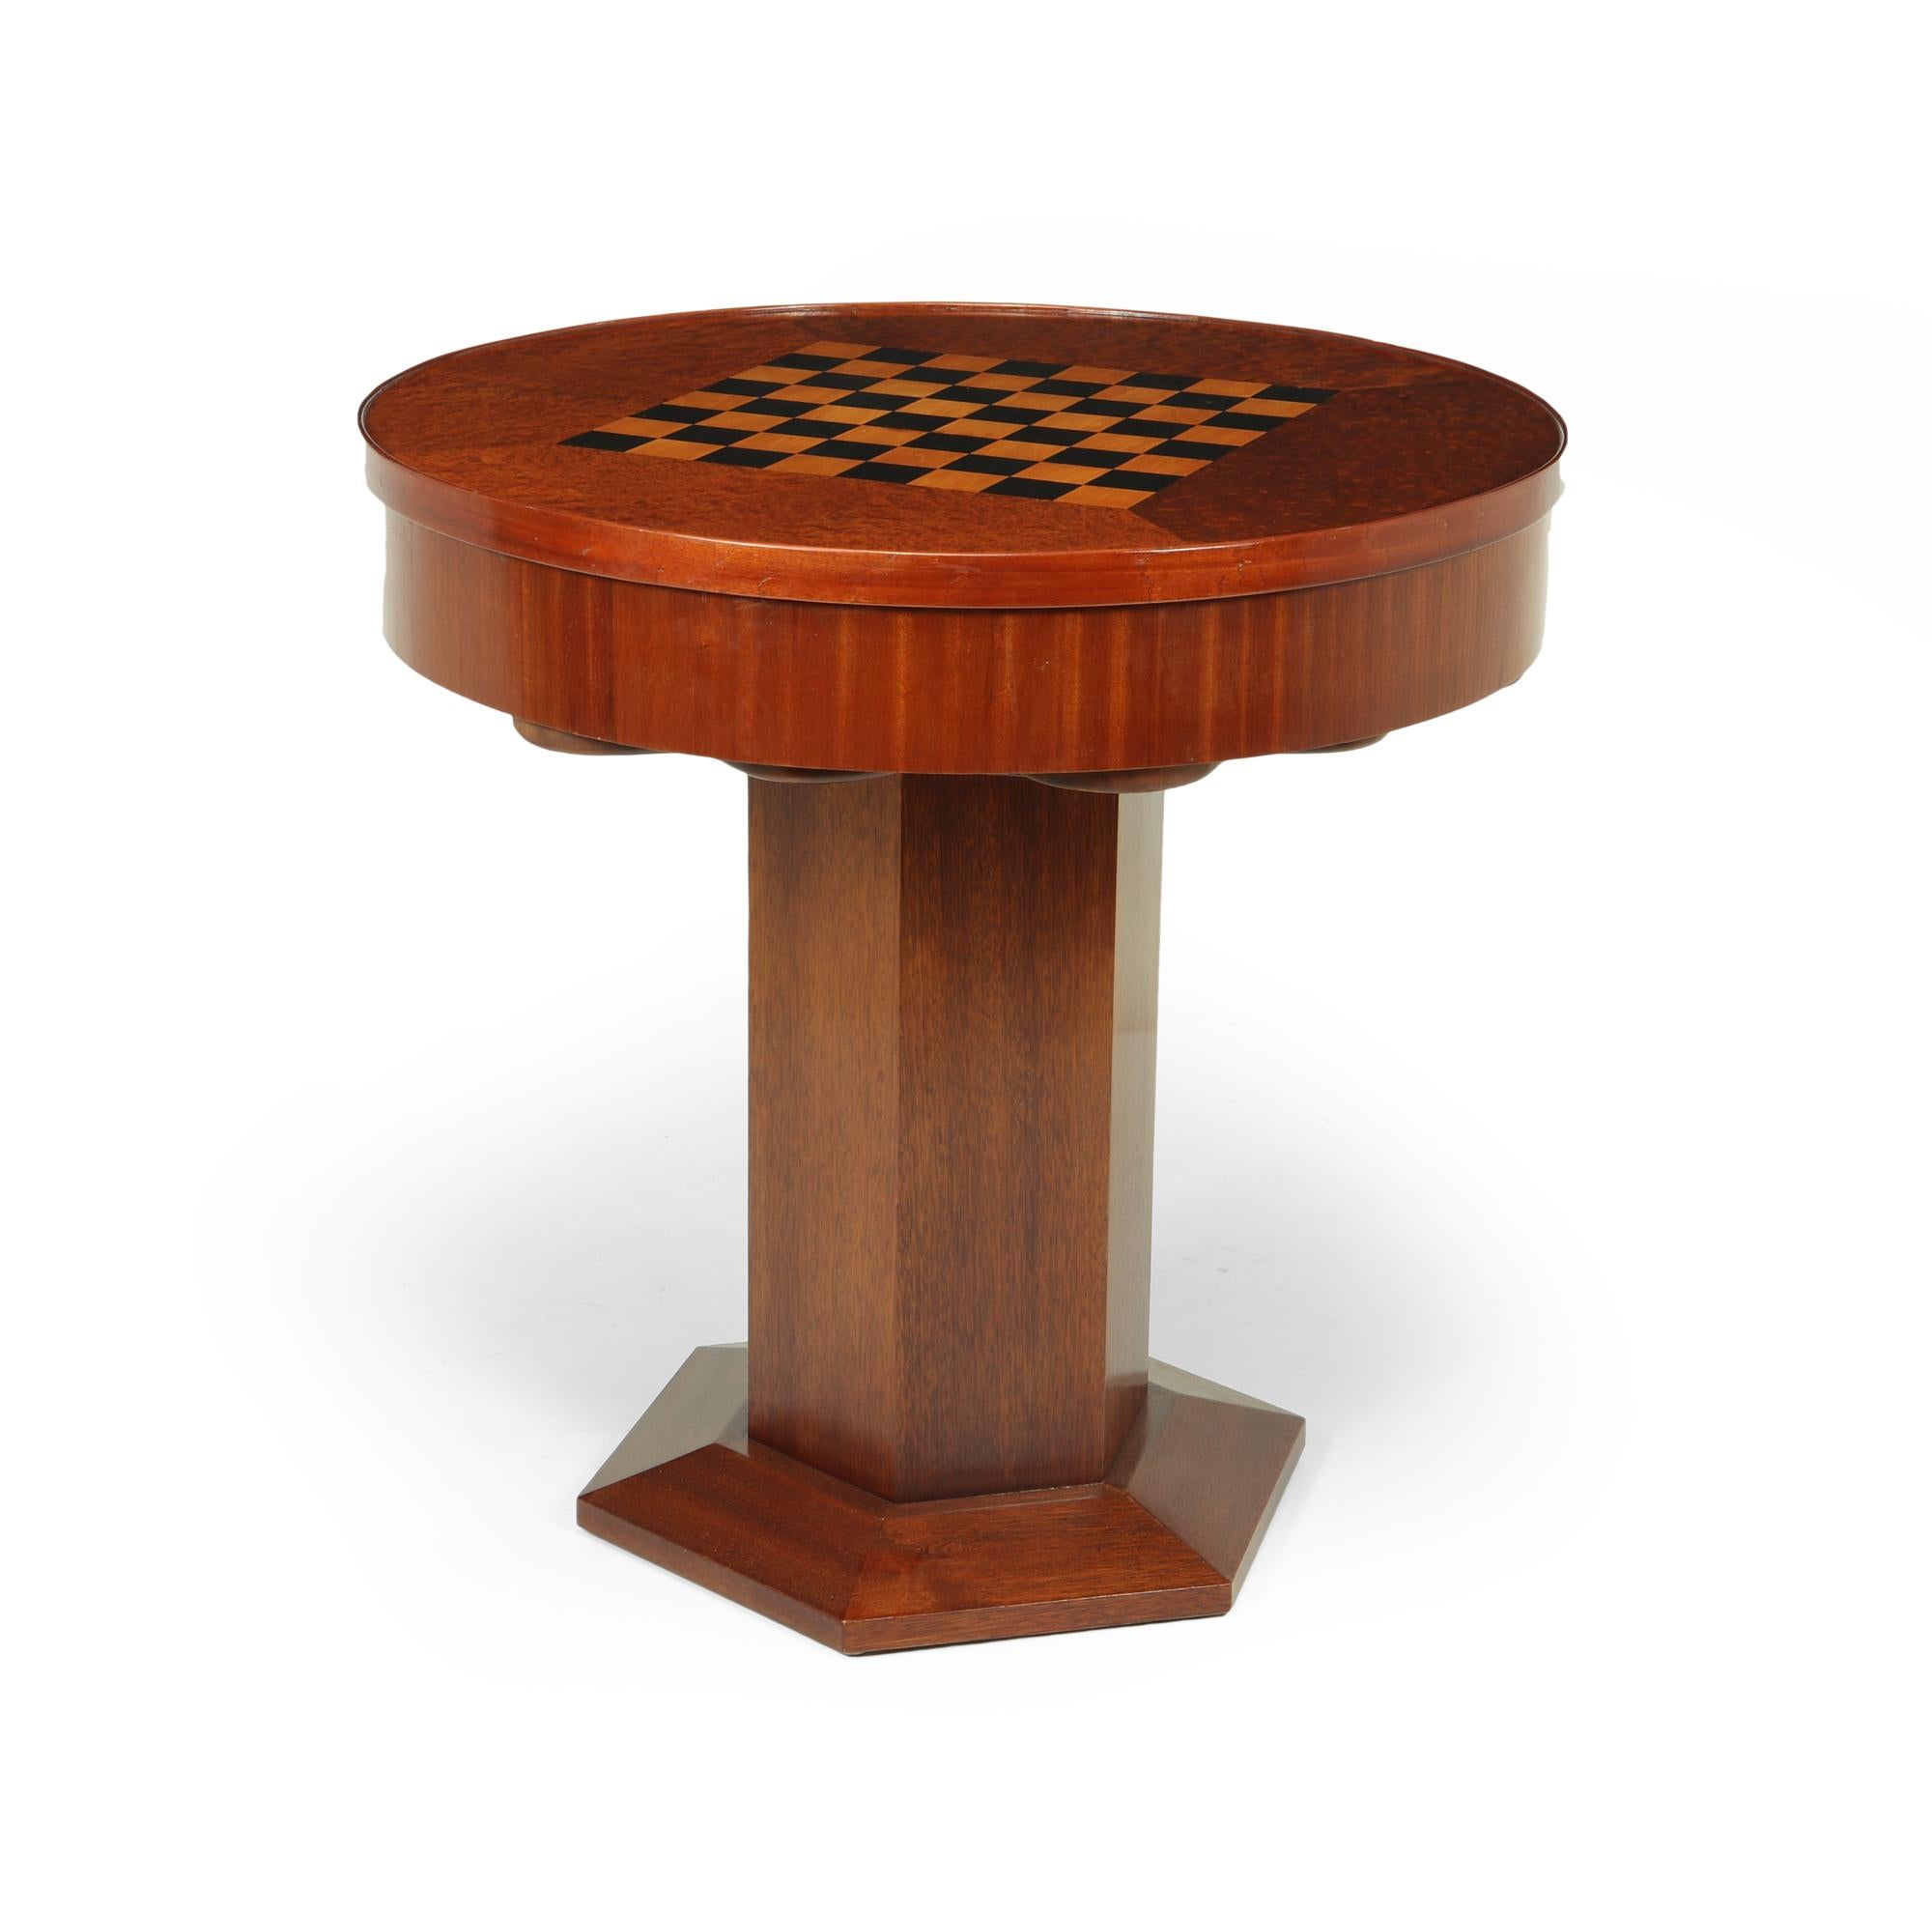 French Art Deco games table c1920

A very rare and unusual games table with mahogany base and amboyna flip over top ebony and boxwood chessboard with flip over top to reveal baize felt lined card table, under this is what I believe to be a marble